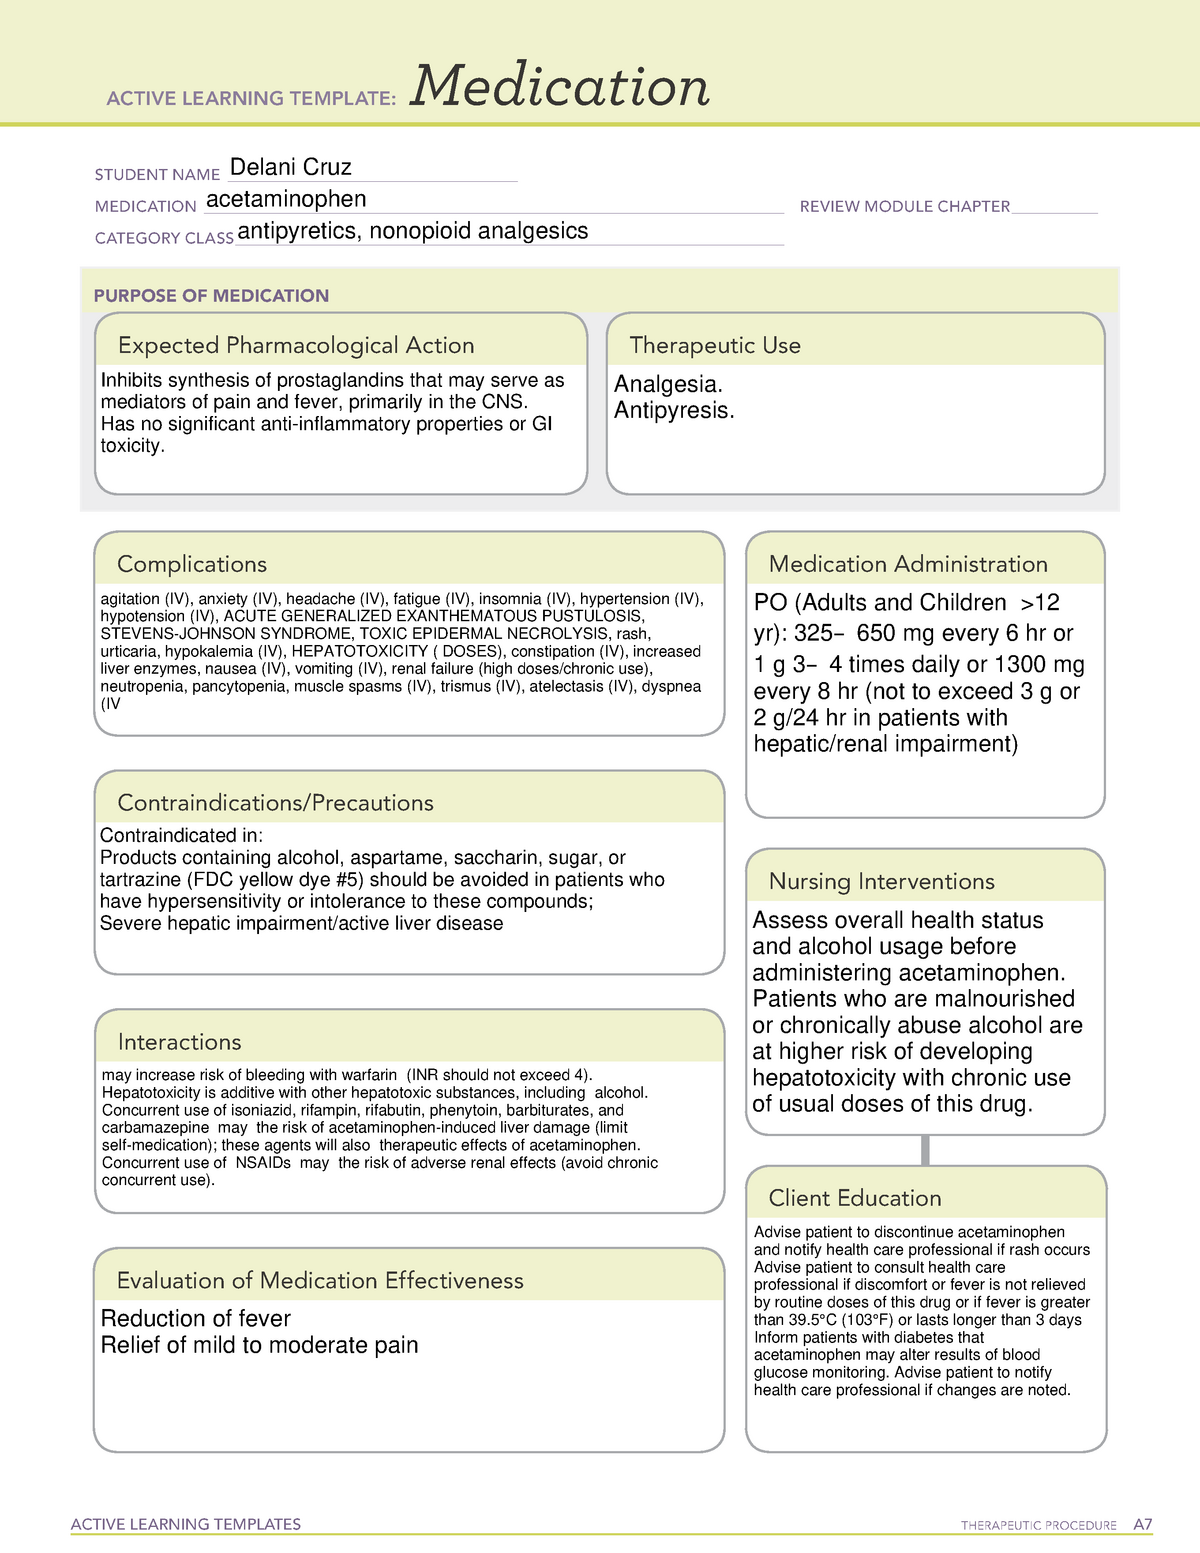 ATI template Acetaminophen ACTIVE LEARNING TEMPLATES THERAPEUTIC